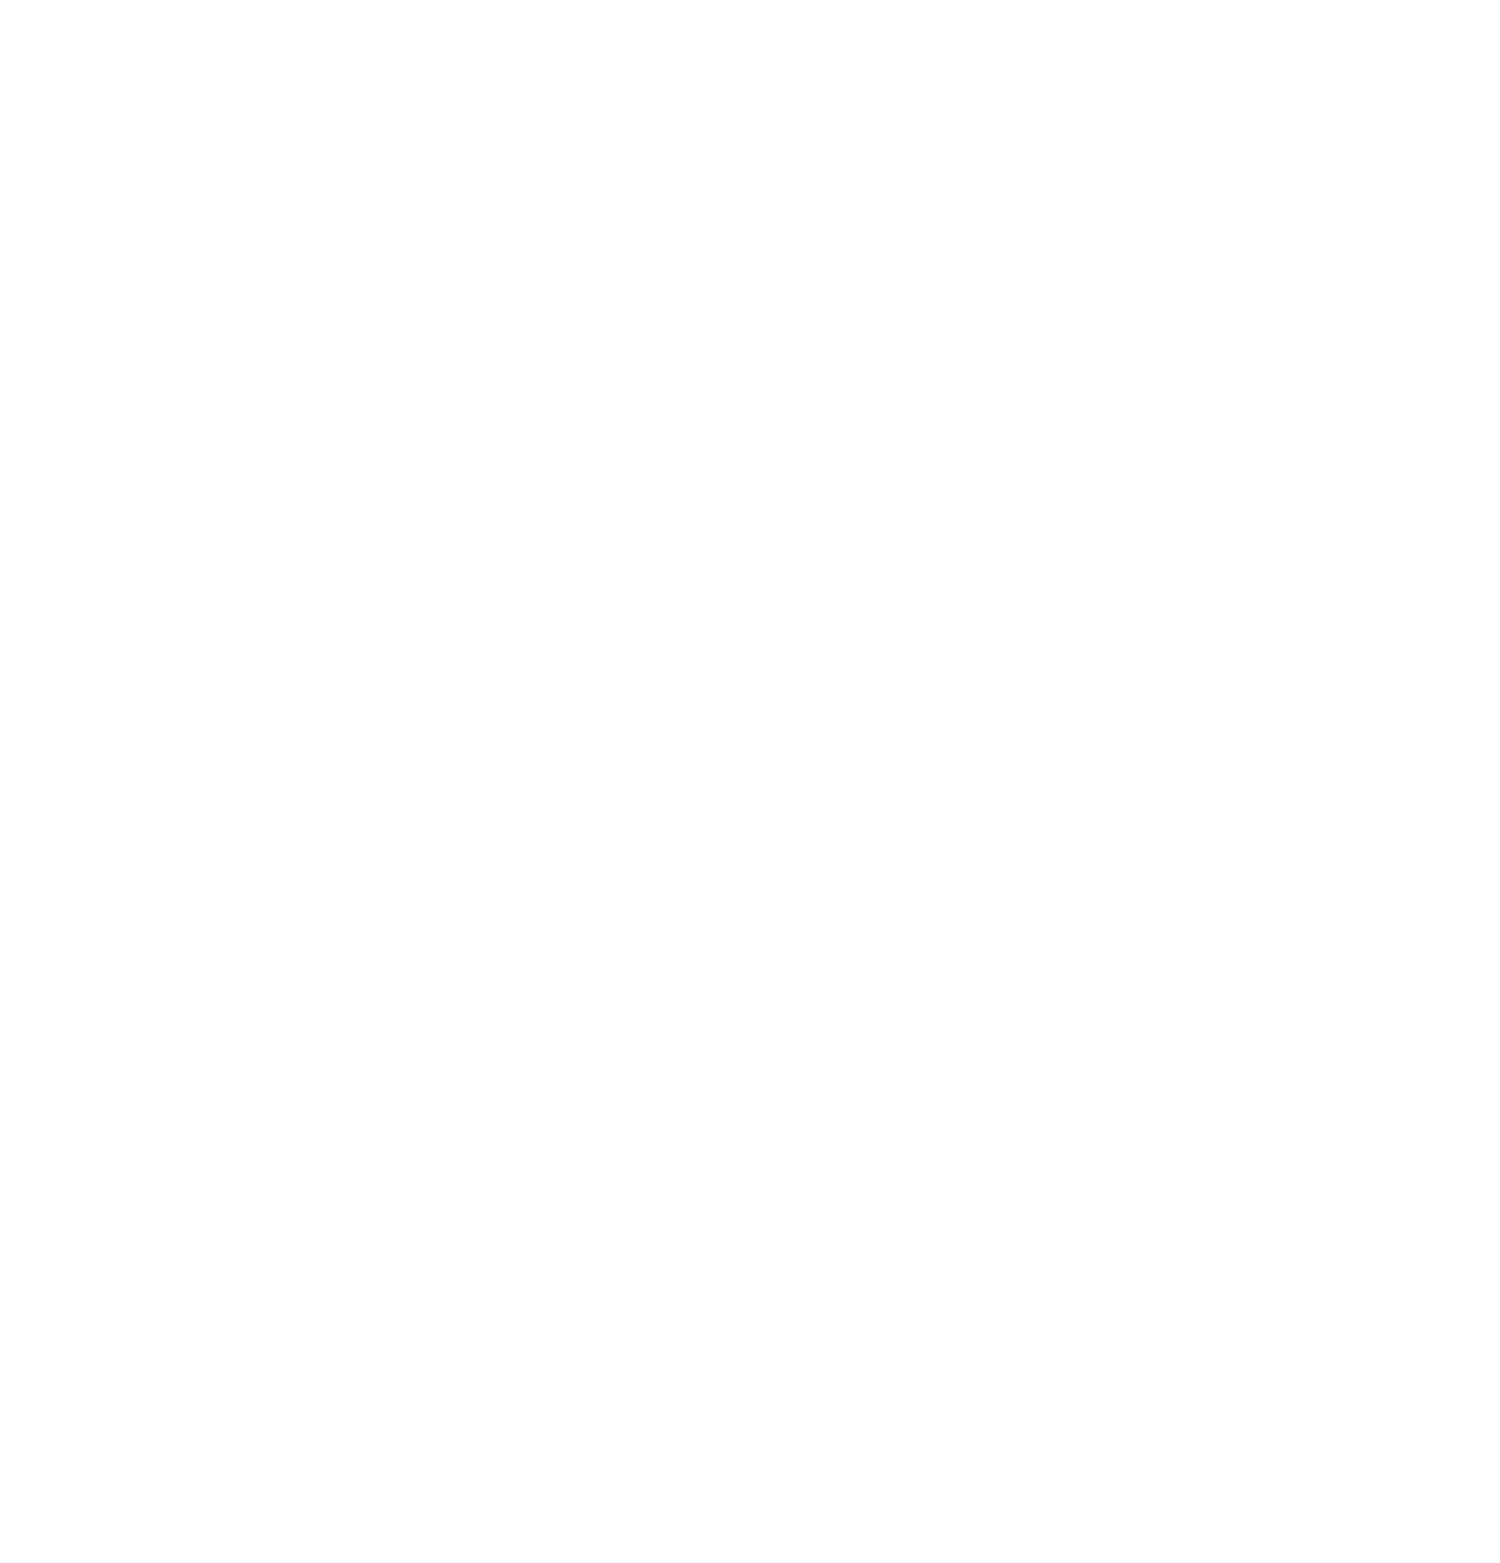 Orr Therapy Services